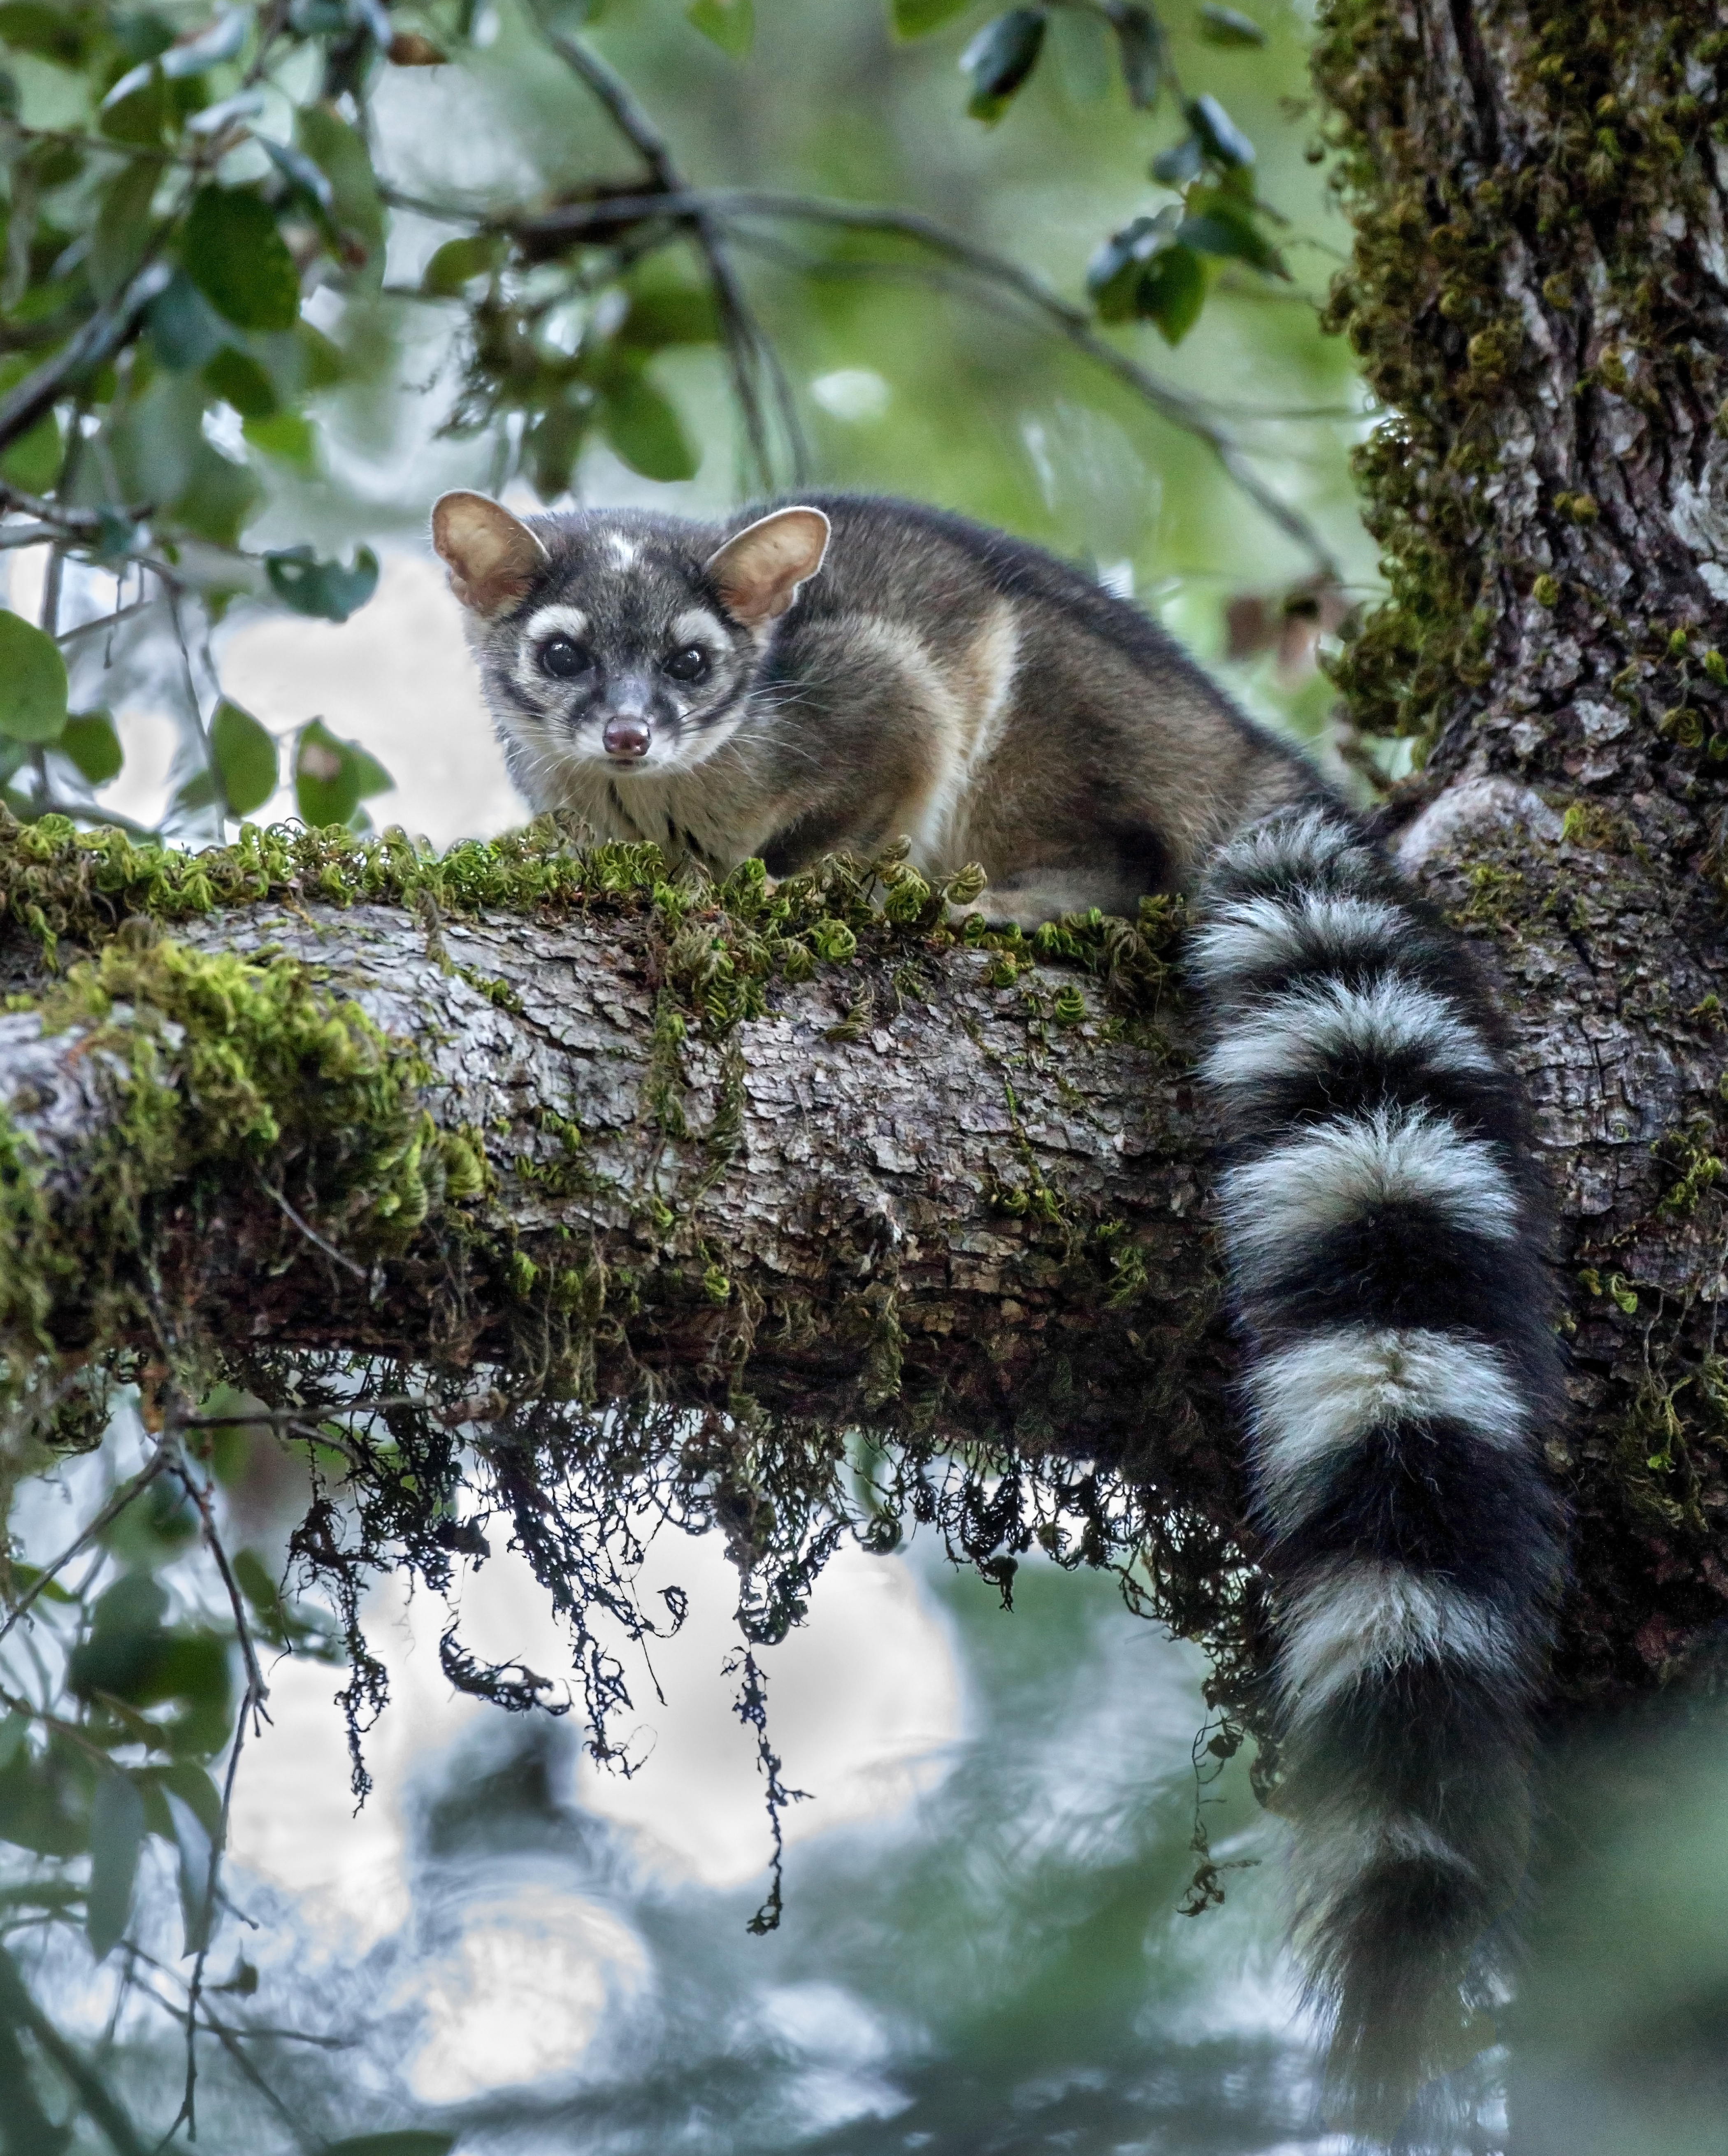 Ringtail on a branch